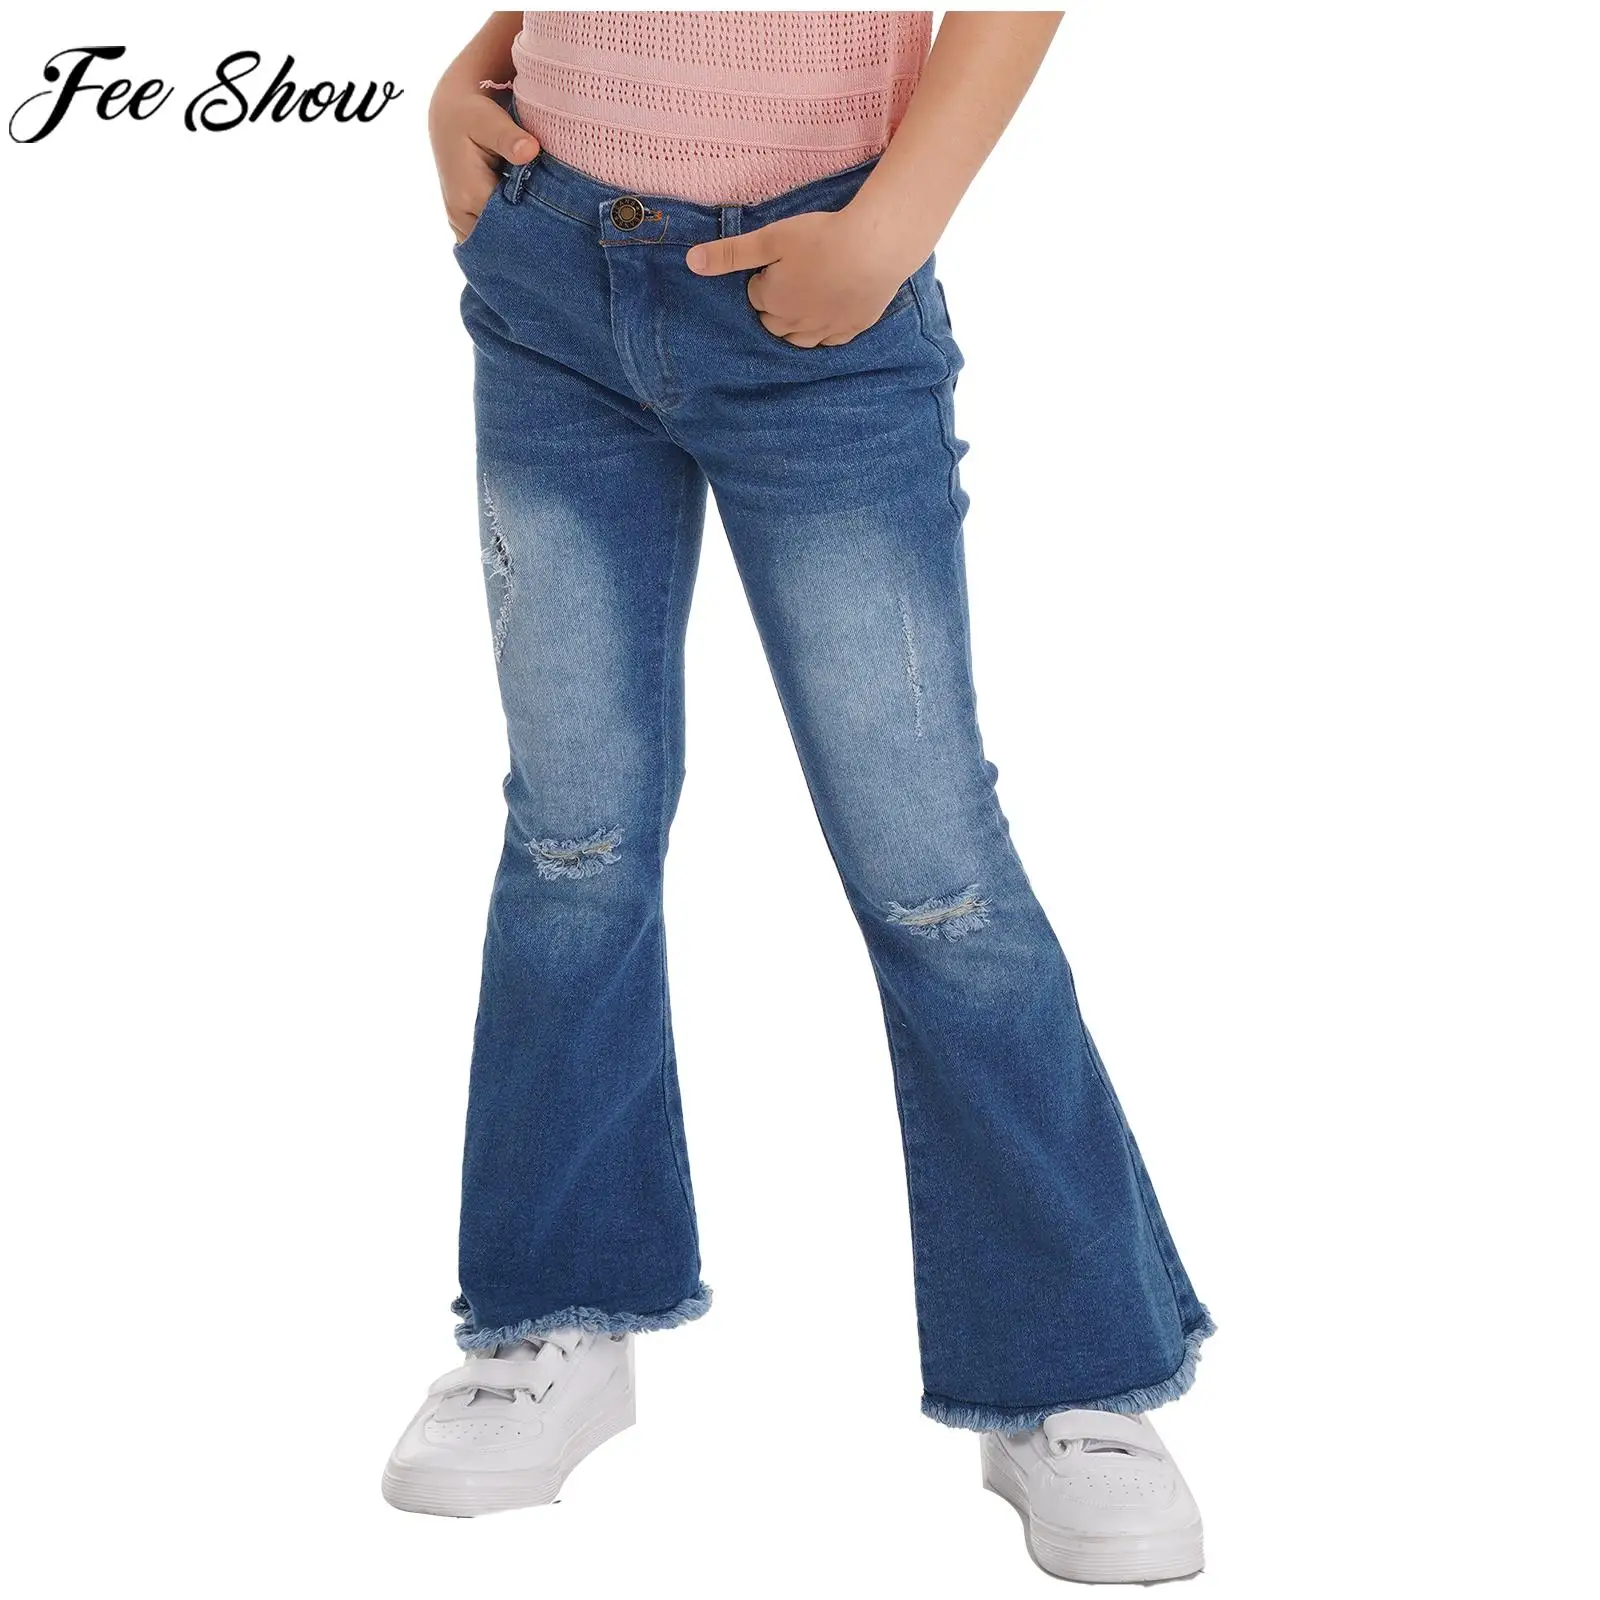 Buy Women's Ripped Distressed Bell Bottom Jeans High Waist Bootcut Flare  Wide Leg Casual Loose Denim Pants (Blue, Medium) at Amazon.in